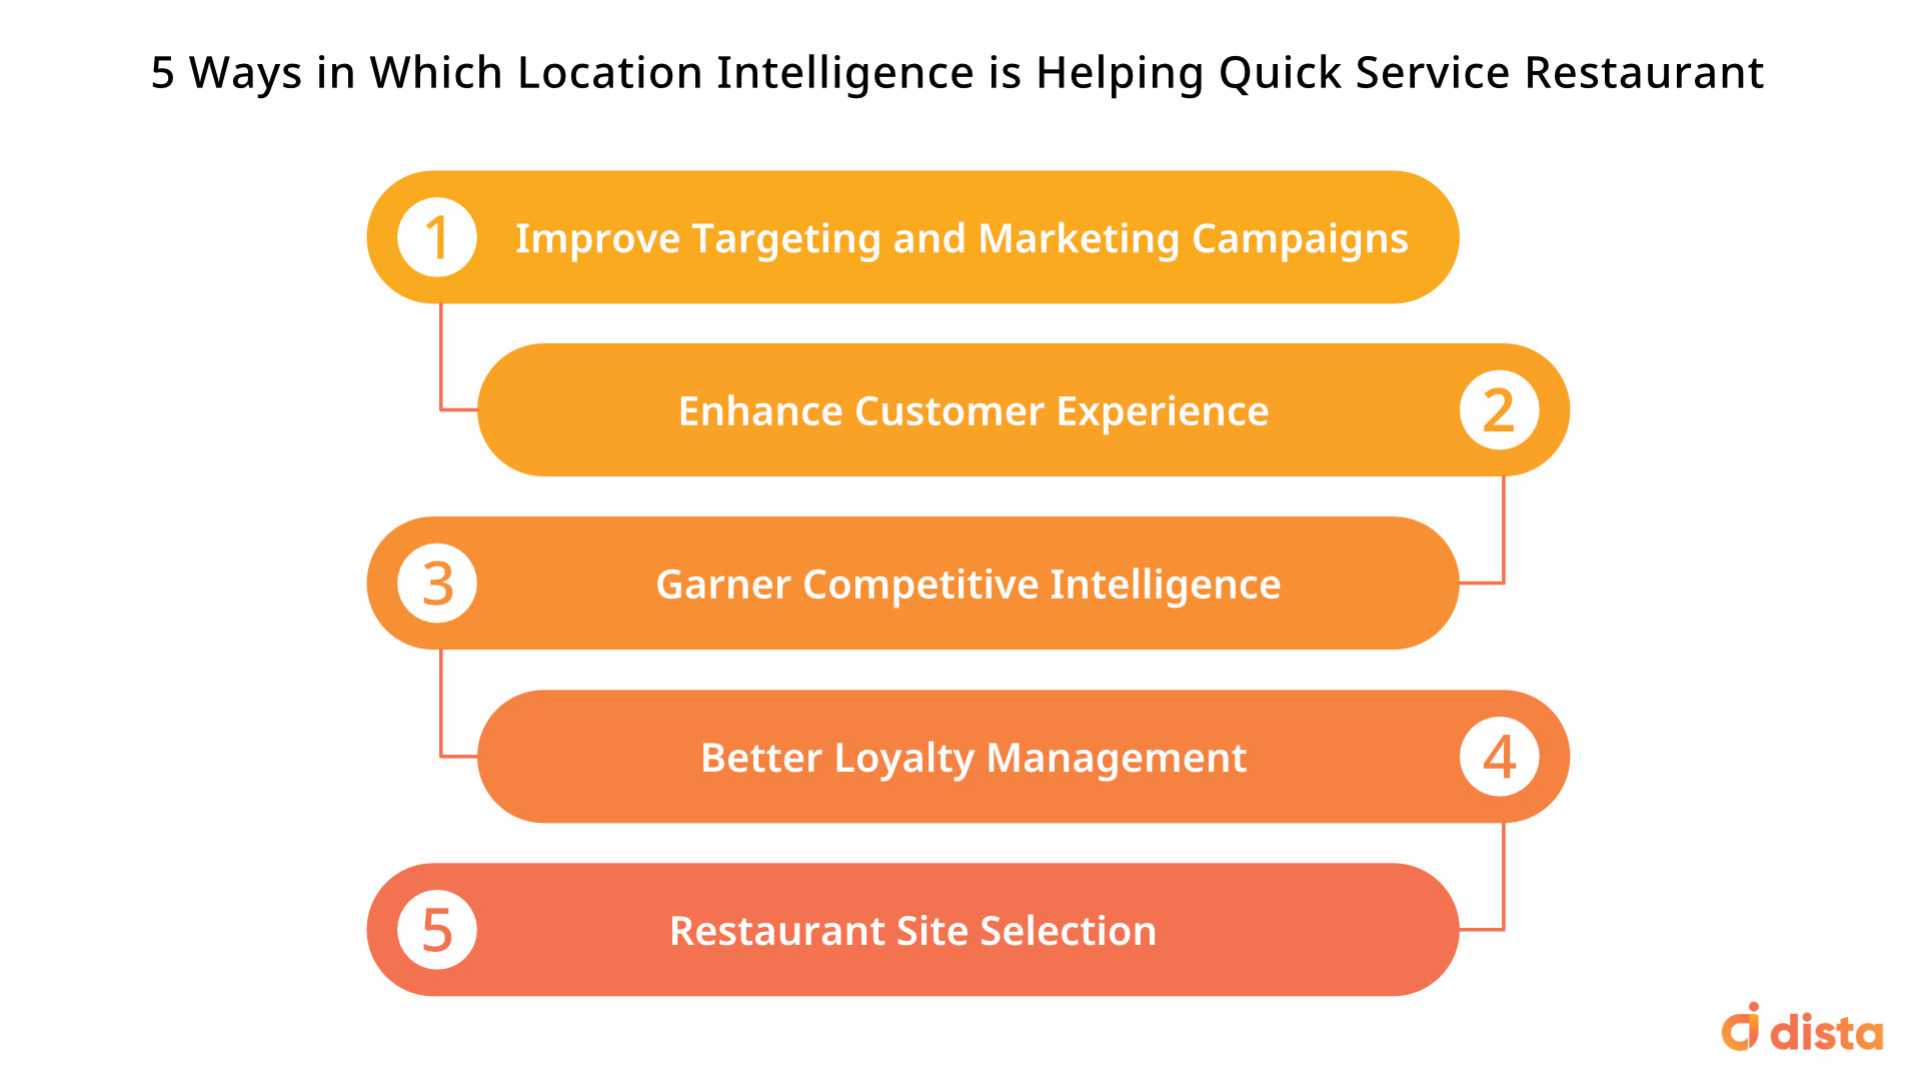 5 Ways in Which Location Intelligence is Helping Quick Service Restaurant